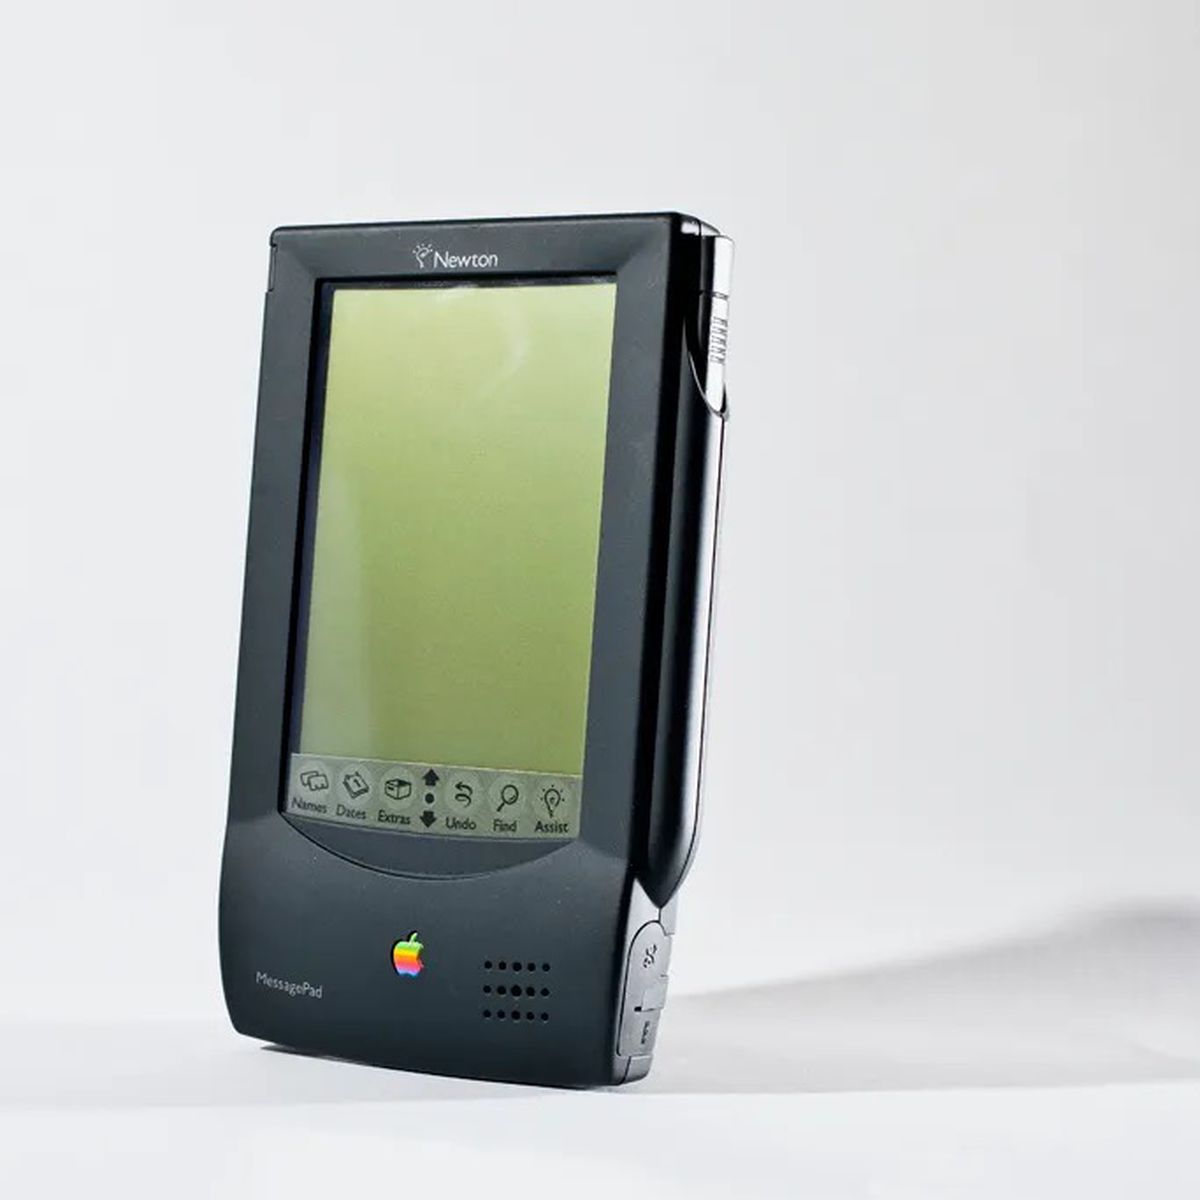 Apple Discontinued the Newton 25 Years Ago Today - MacRumors